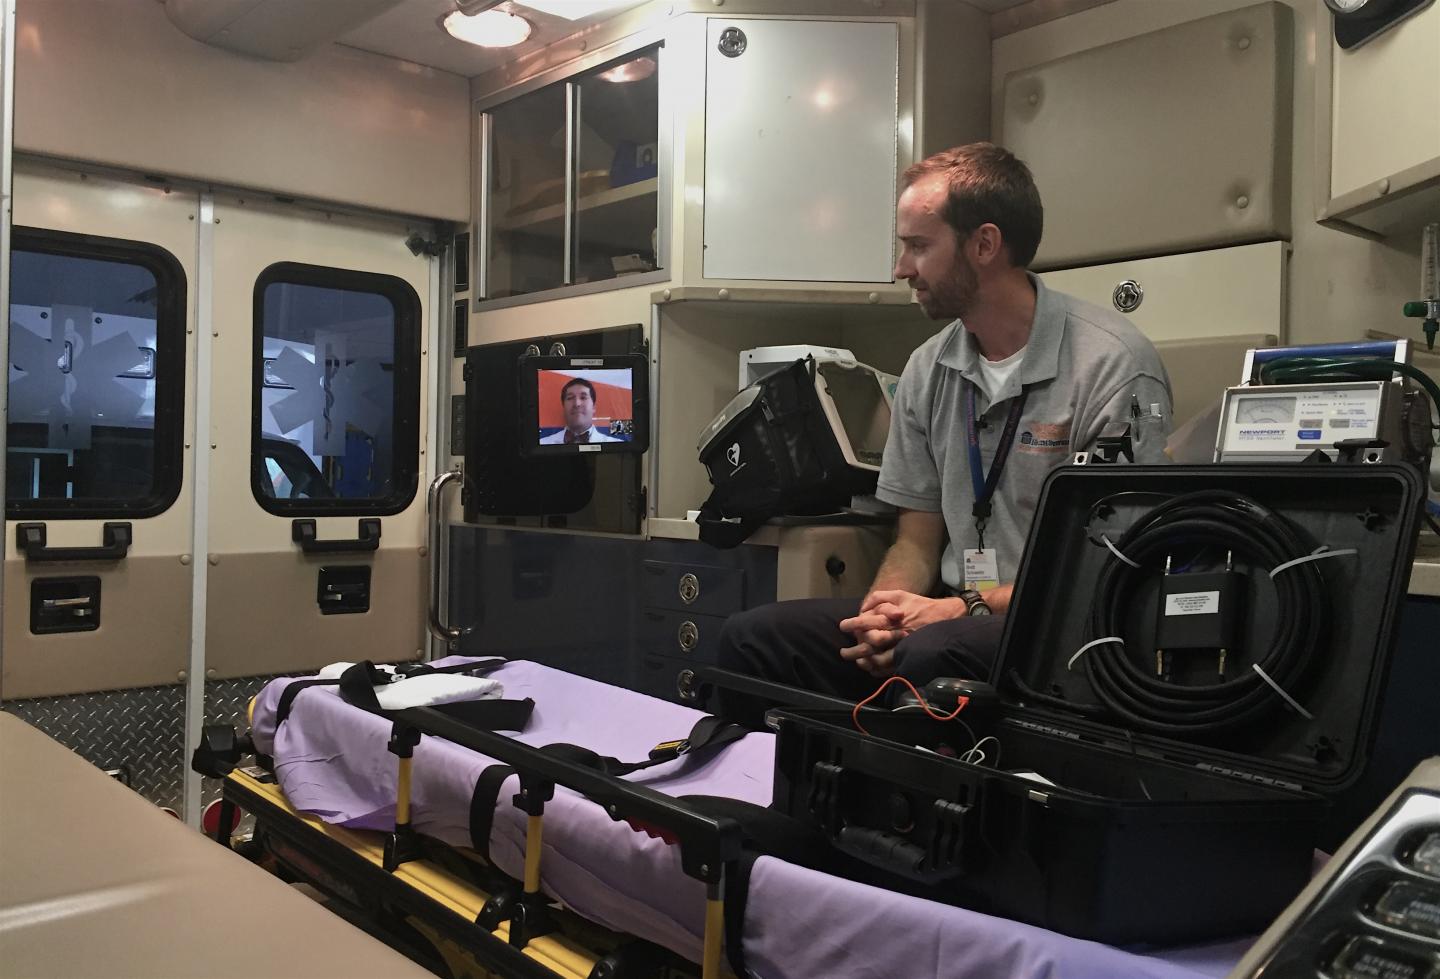 Electronic Tablets Can Speed Stroke Care during Patient Transport